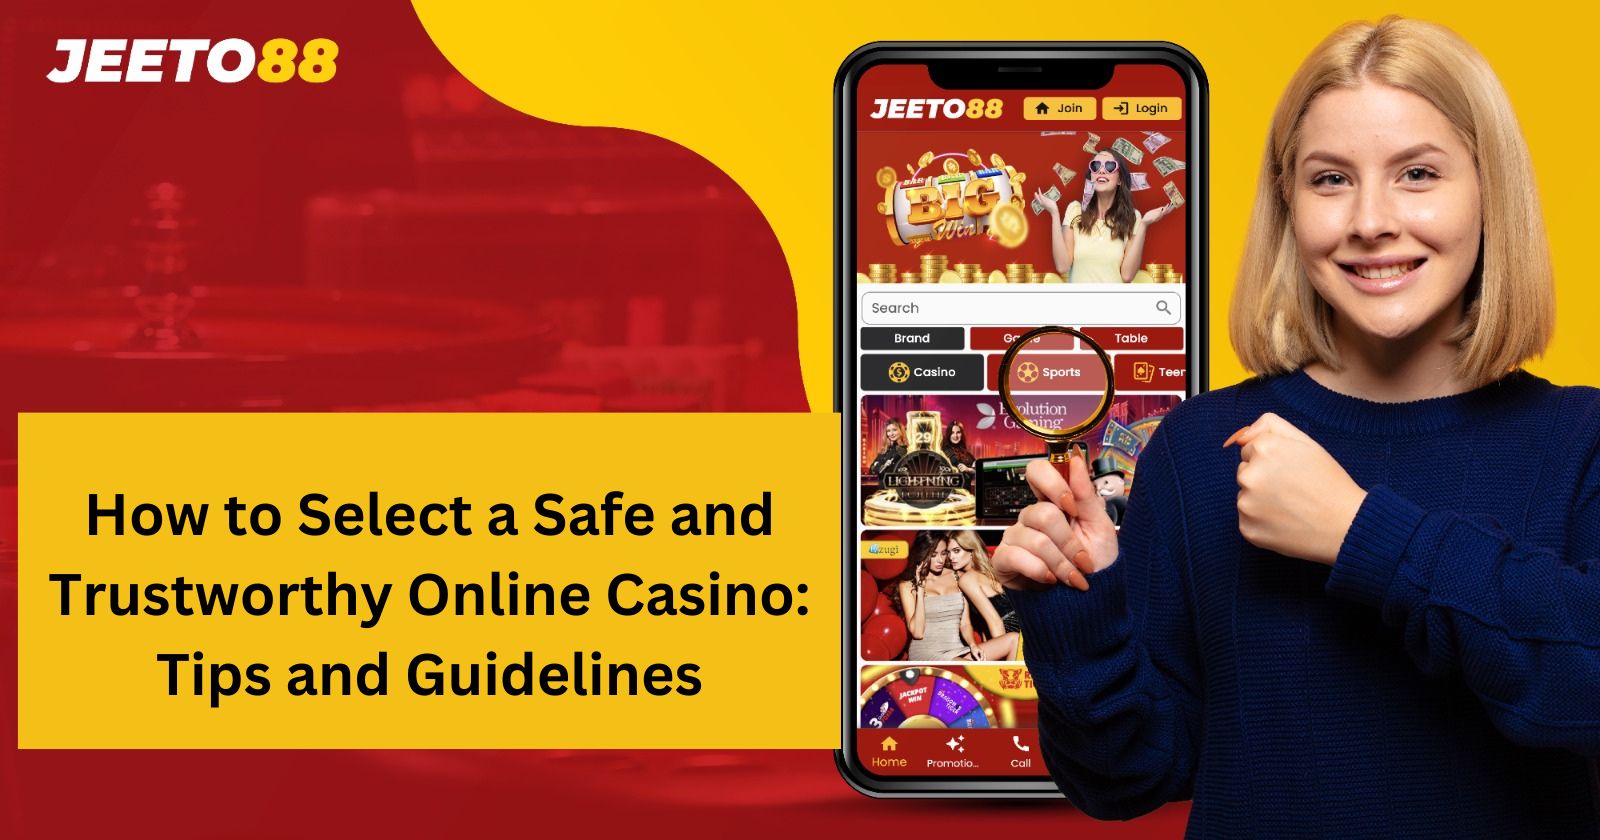 How to Select a Safe and Trustworthy Online Casino